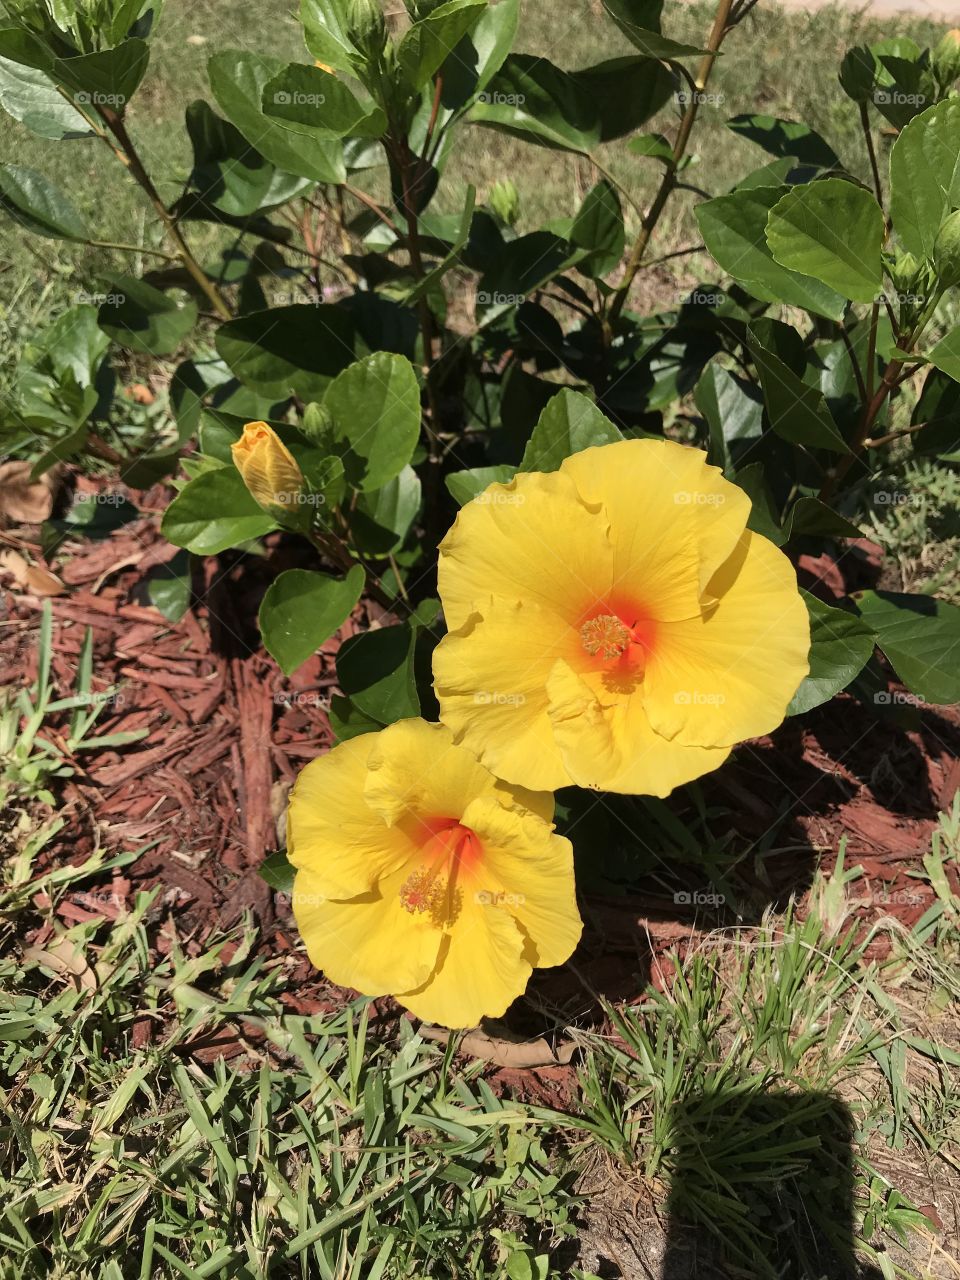 Gorgeous yellow hibiscus flowers! They are so beautiful! I love the Florida flowers!